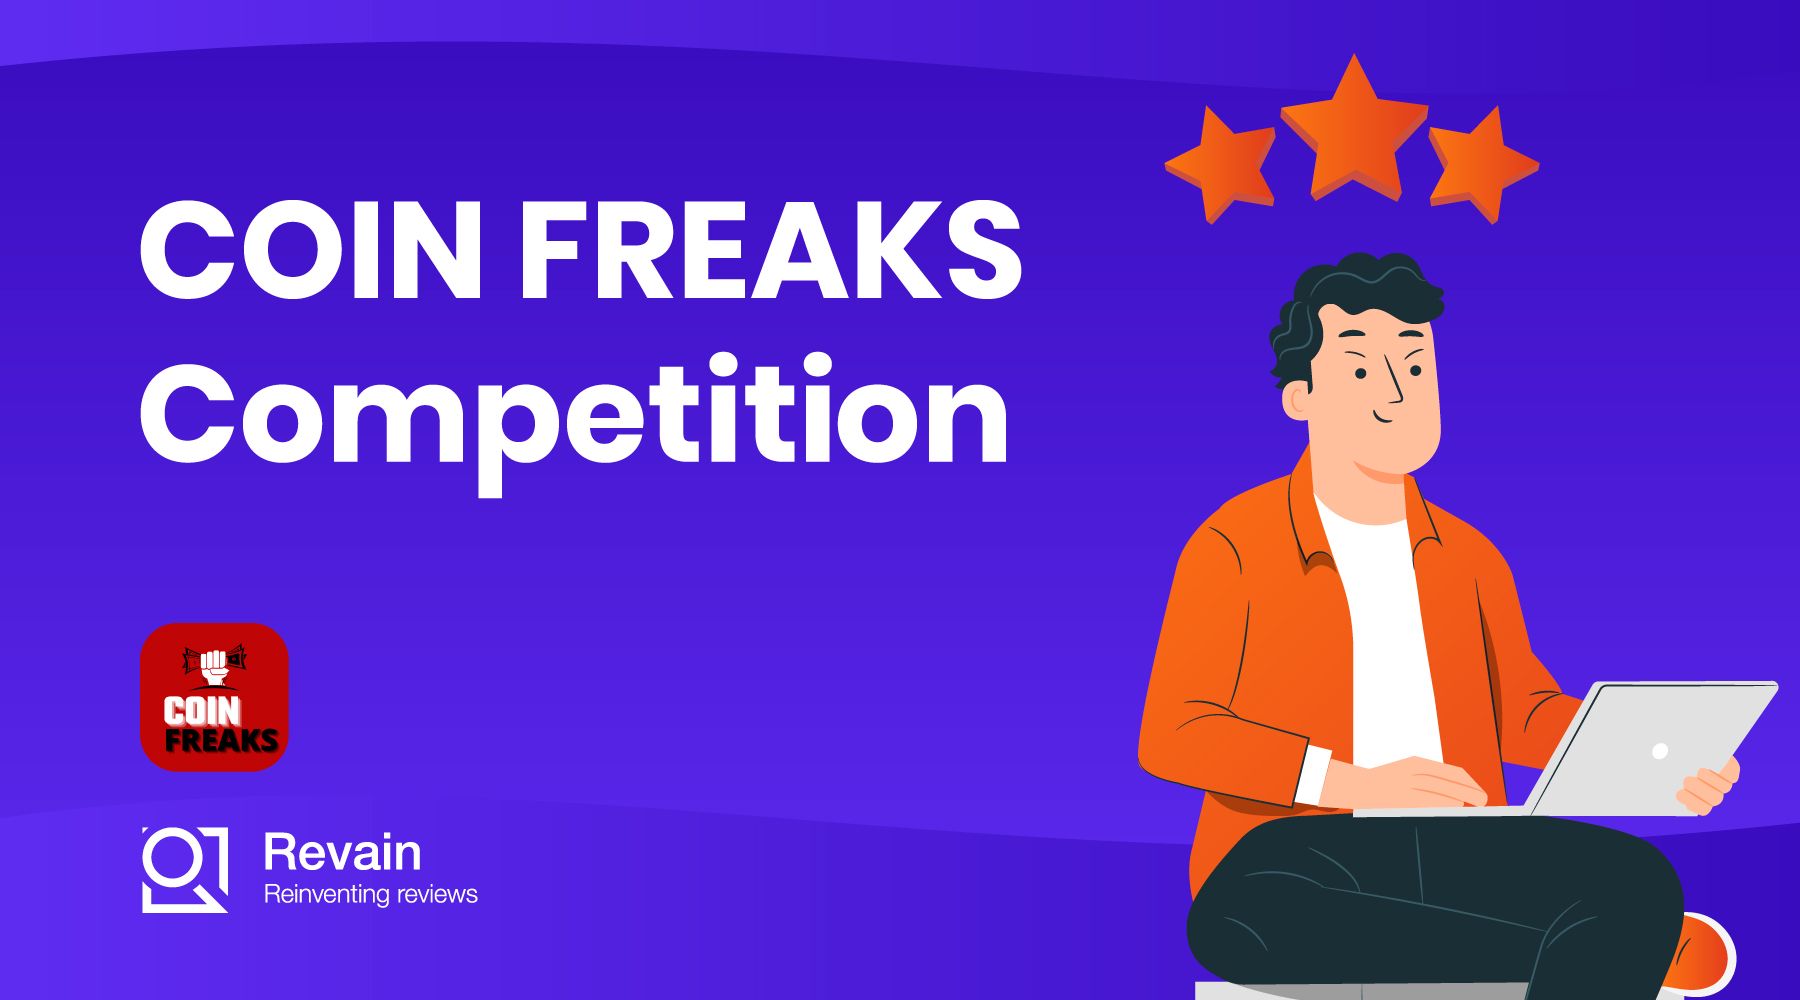 Article Revain and Coin Freaks review competition has already started!